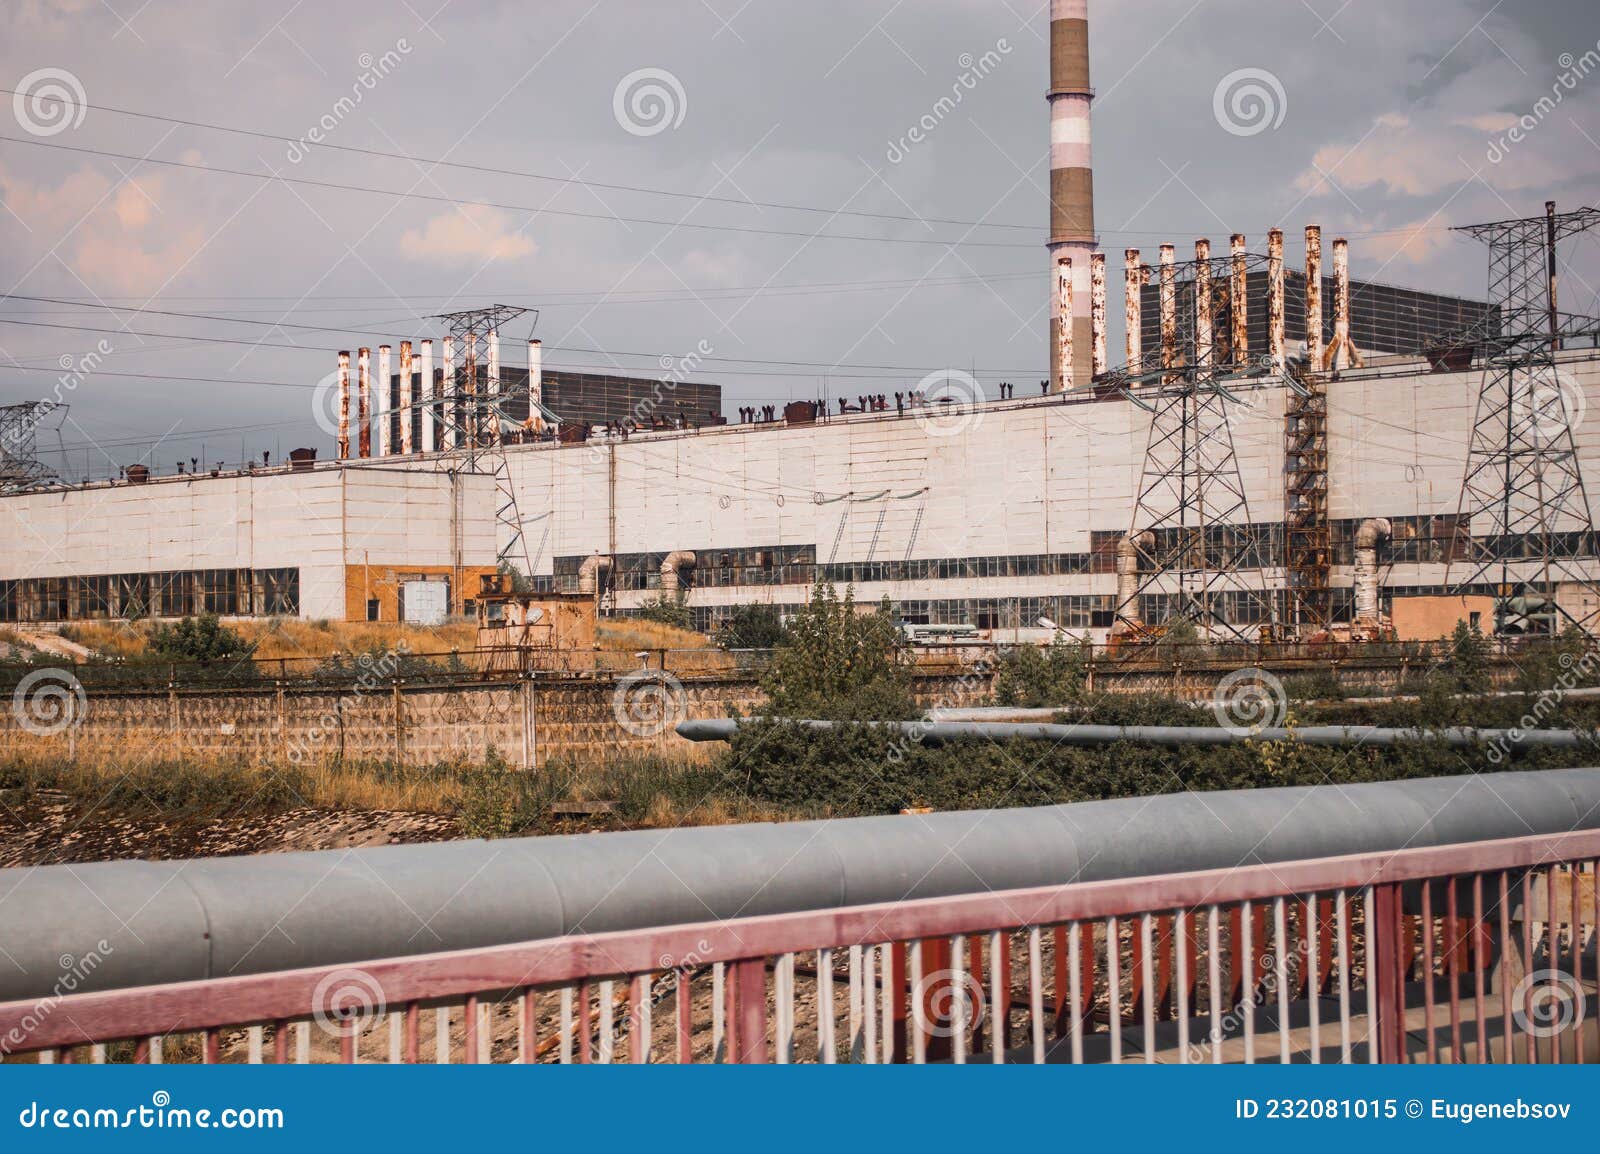 Chernobyl Nuclear Power Plant Reactor Explosion Stock Image - Image of anxiety, radiation: 232081015